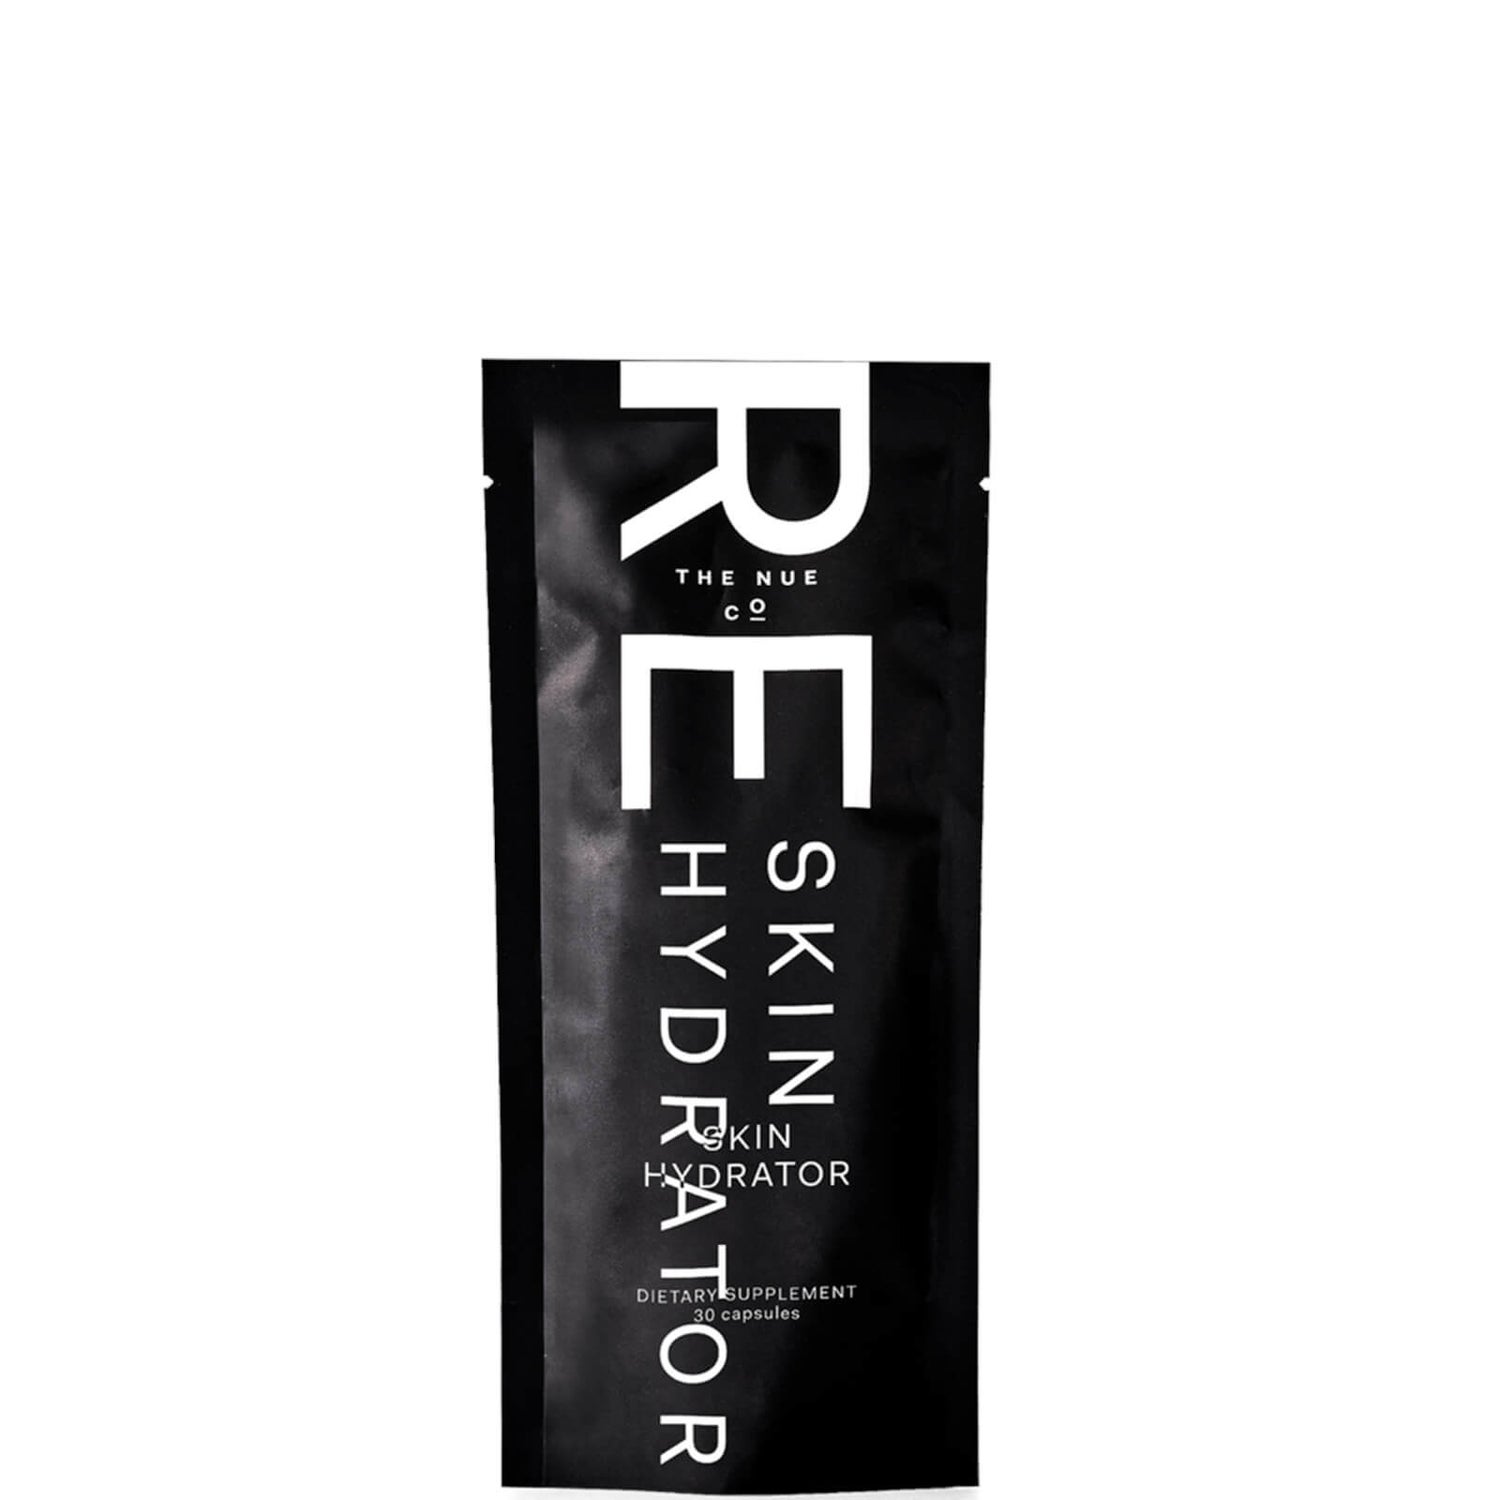 The Nue Co. Skin Hydrator Refill (30 Capsules)